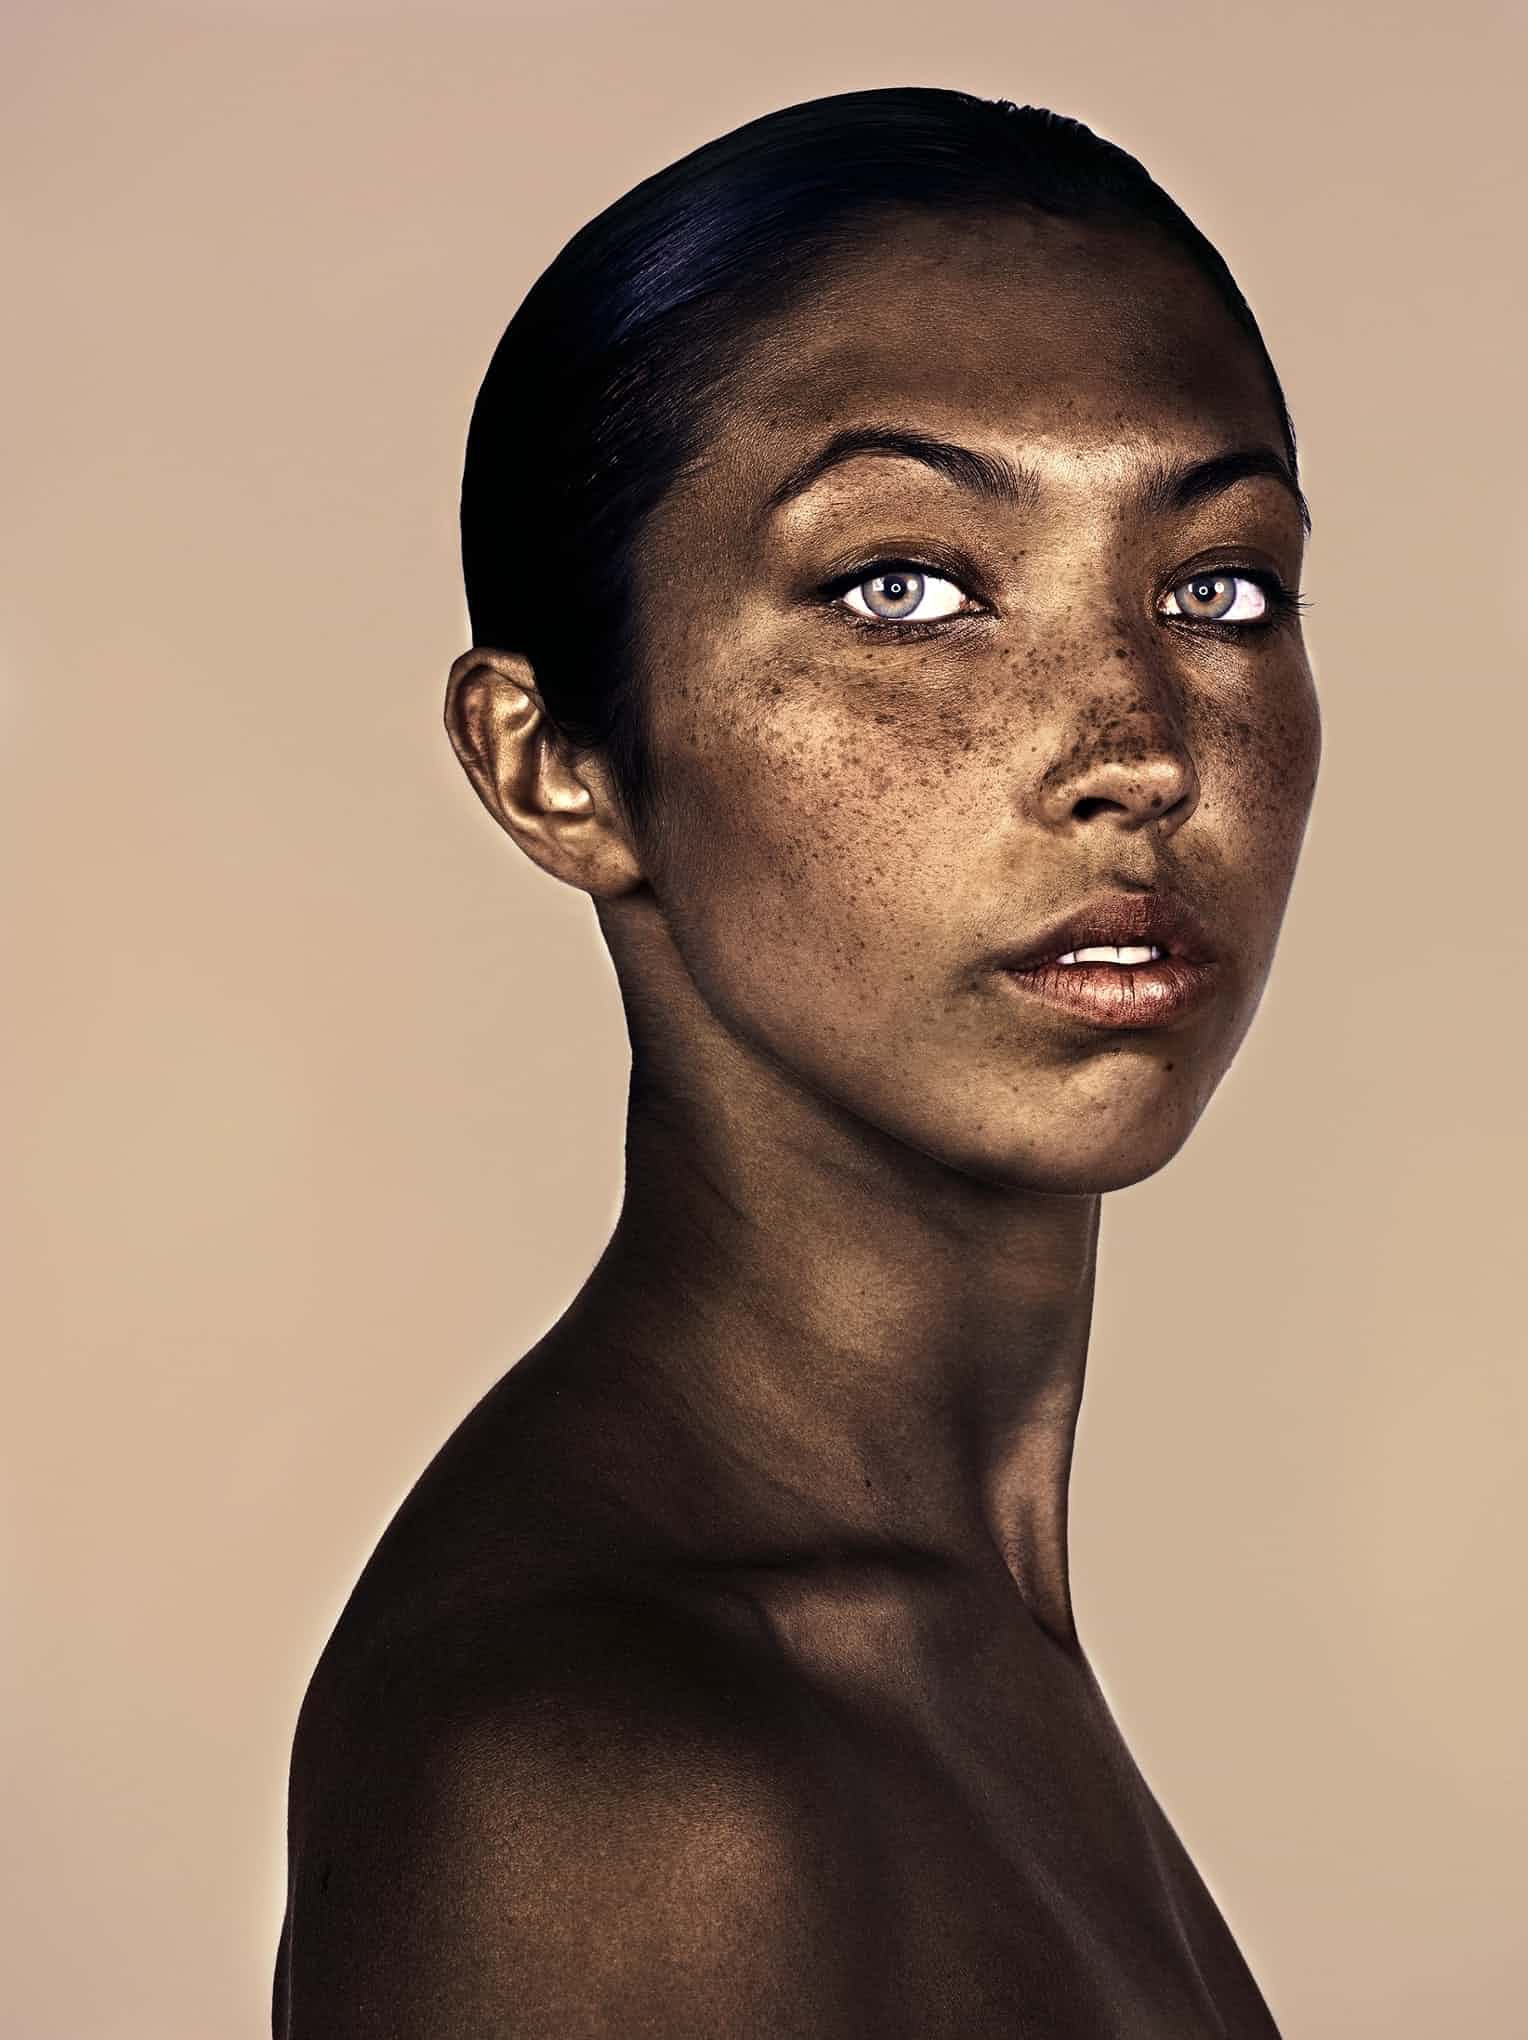 The Beauty of Freckles by Brock Elbank